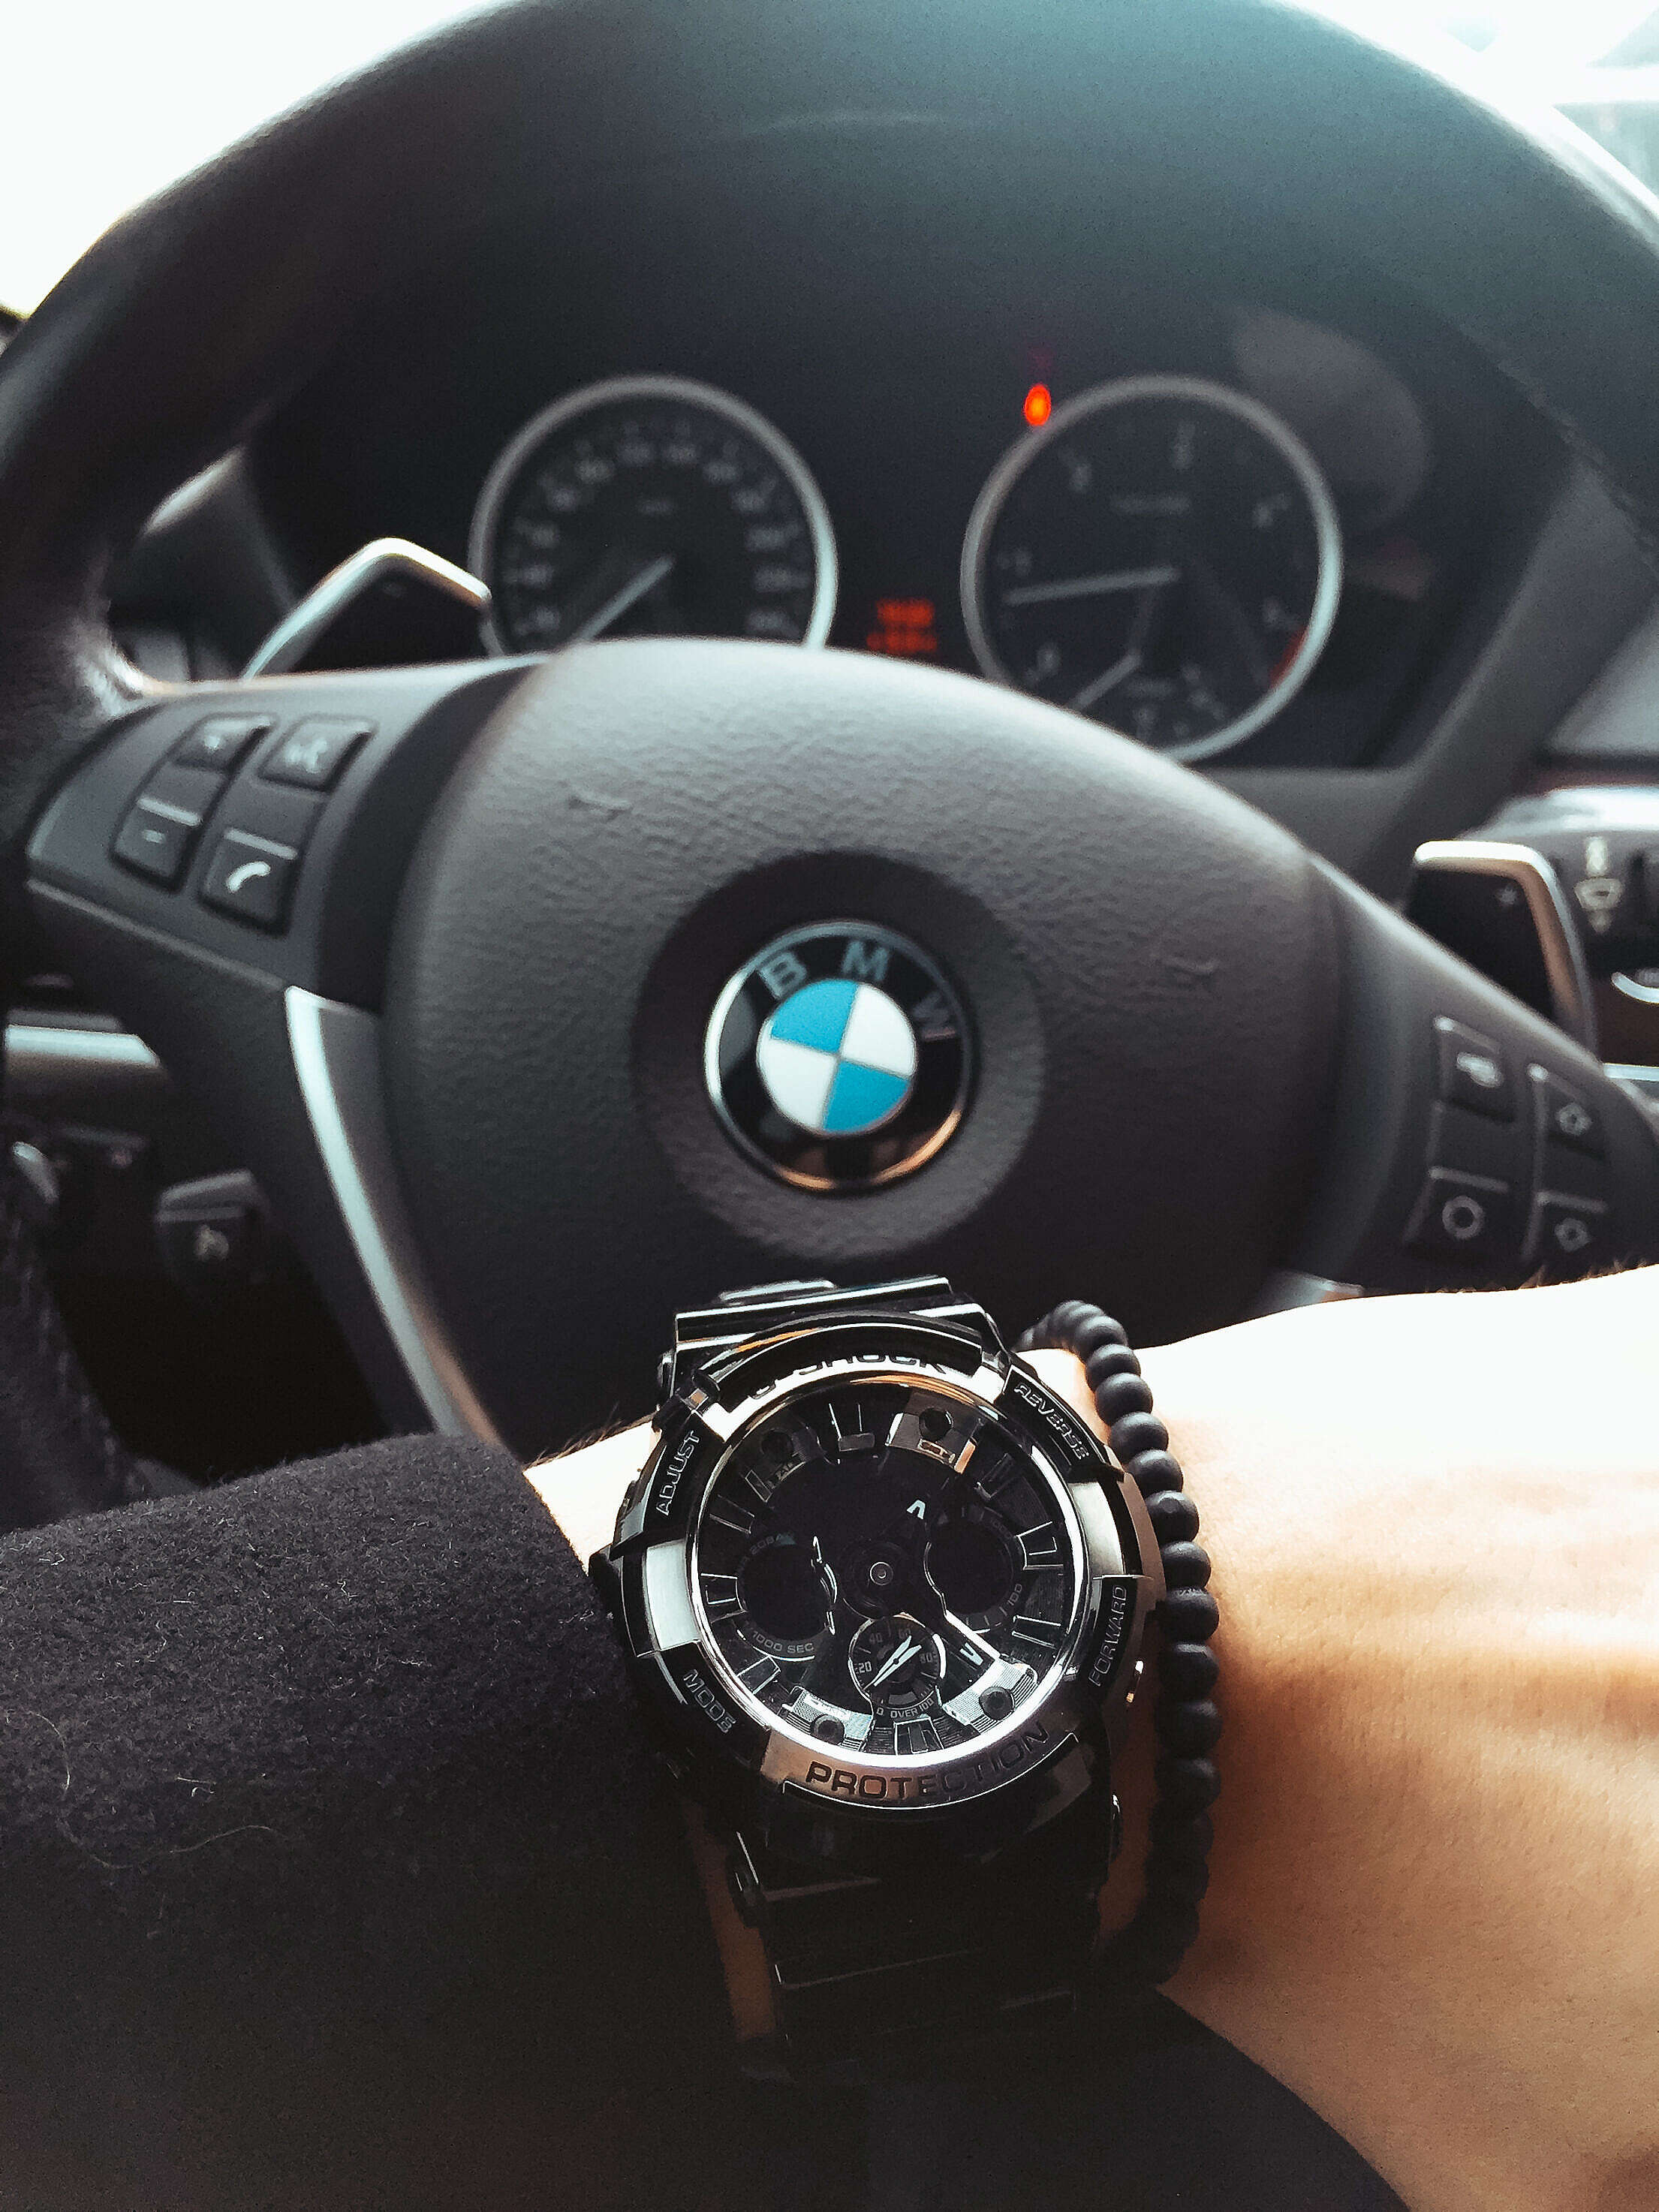 Watches and Steering Wheel Lifestyle Free Stock Photo